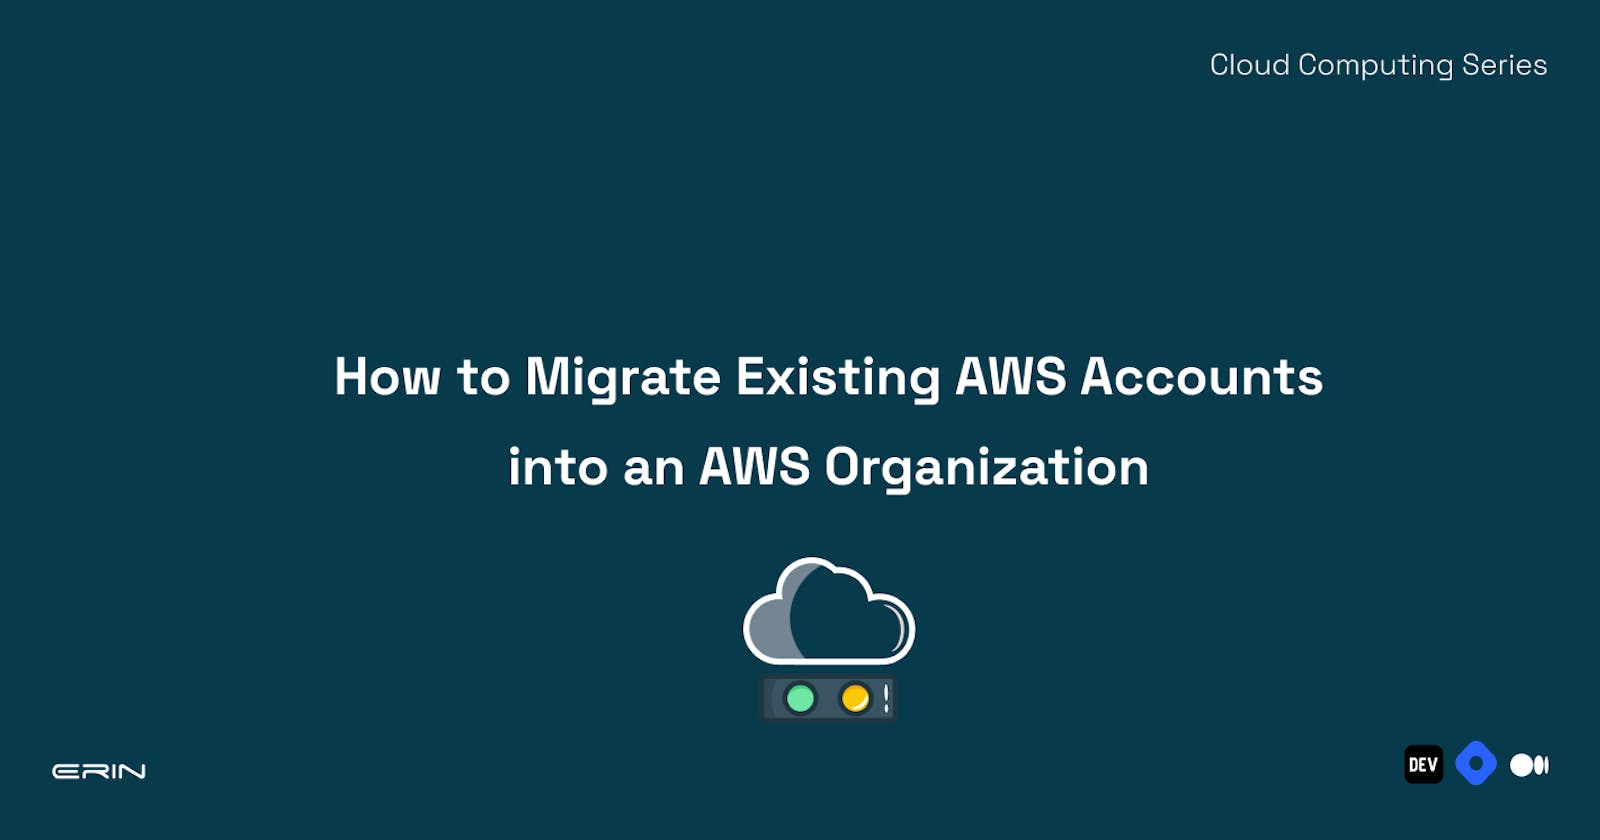 How to Migrate Existing AWS Accounts into AWS Organizations